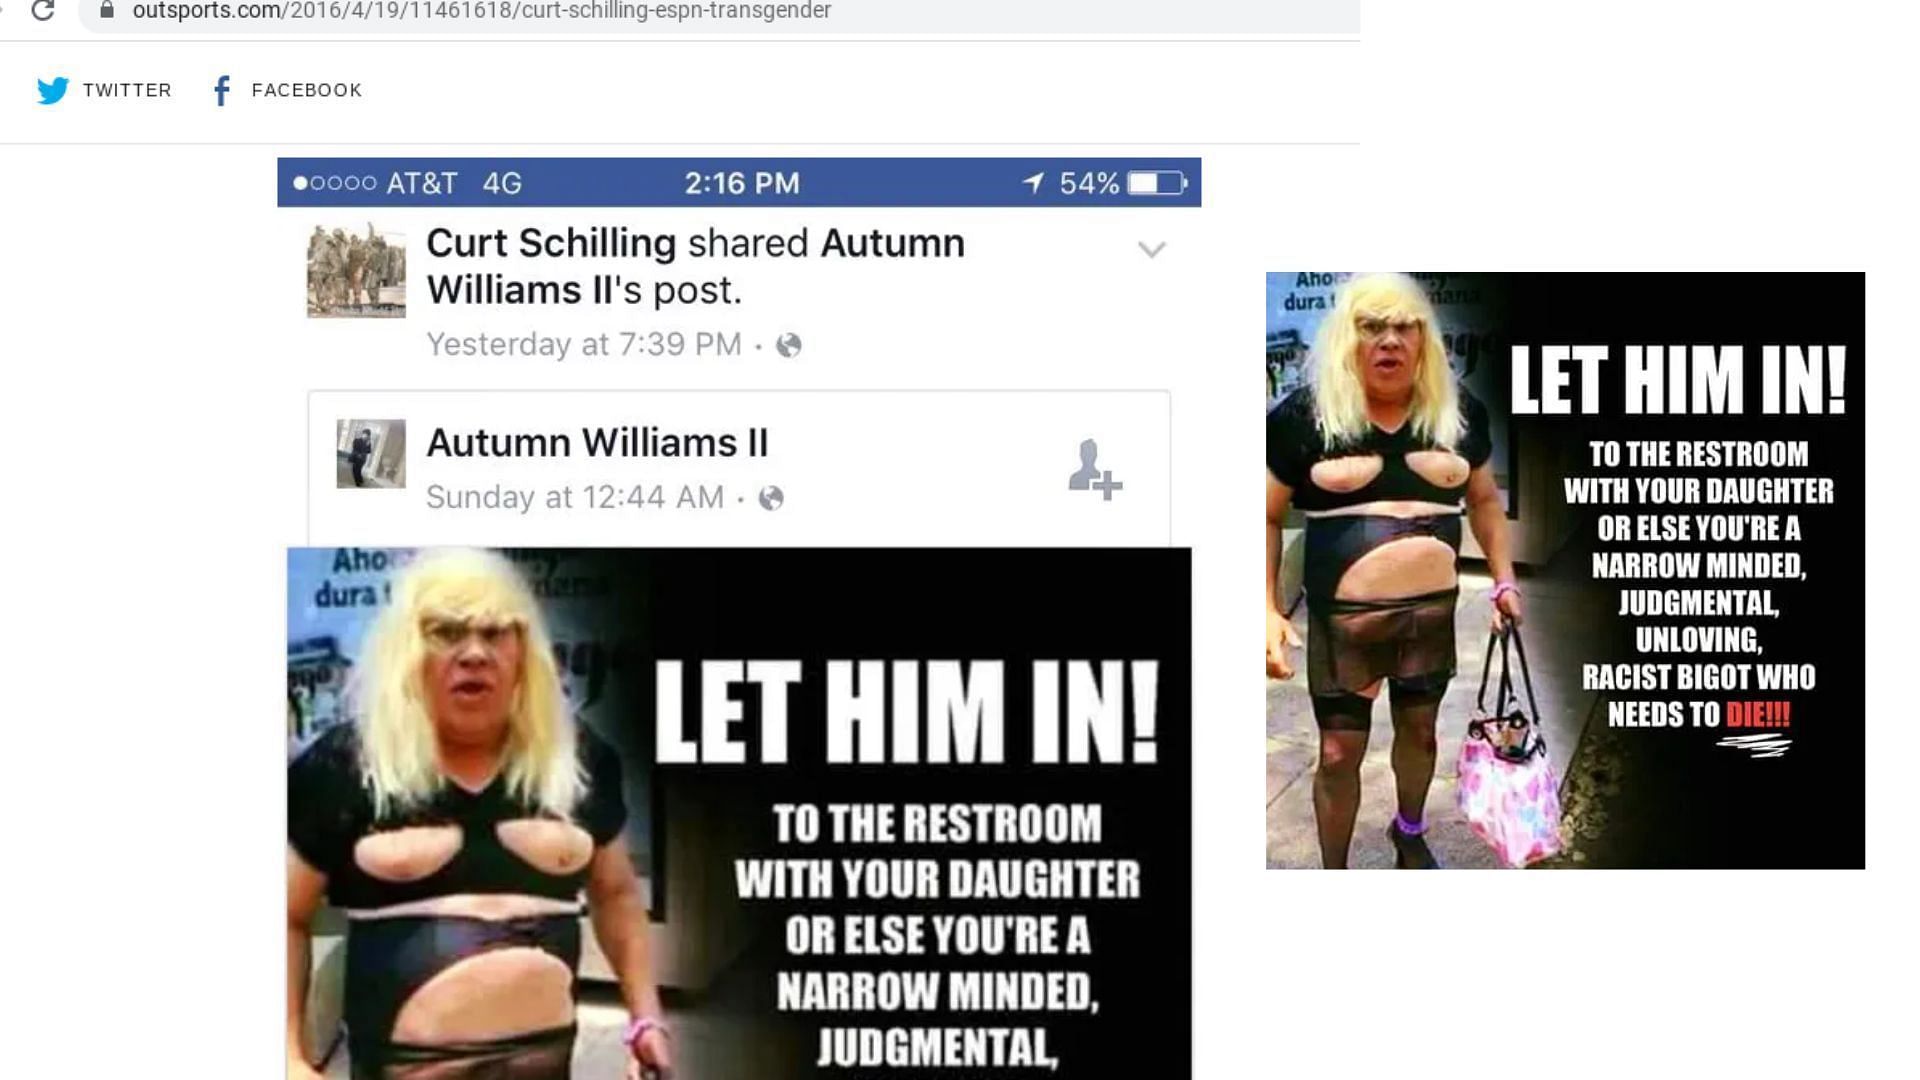 Deleted Facebook post of Curt Schilling shared by Outsports on their blog.